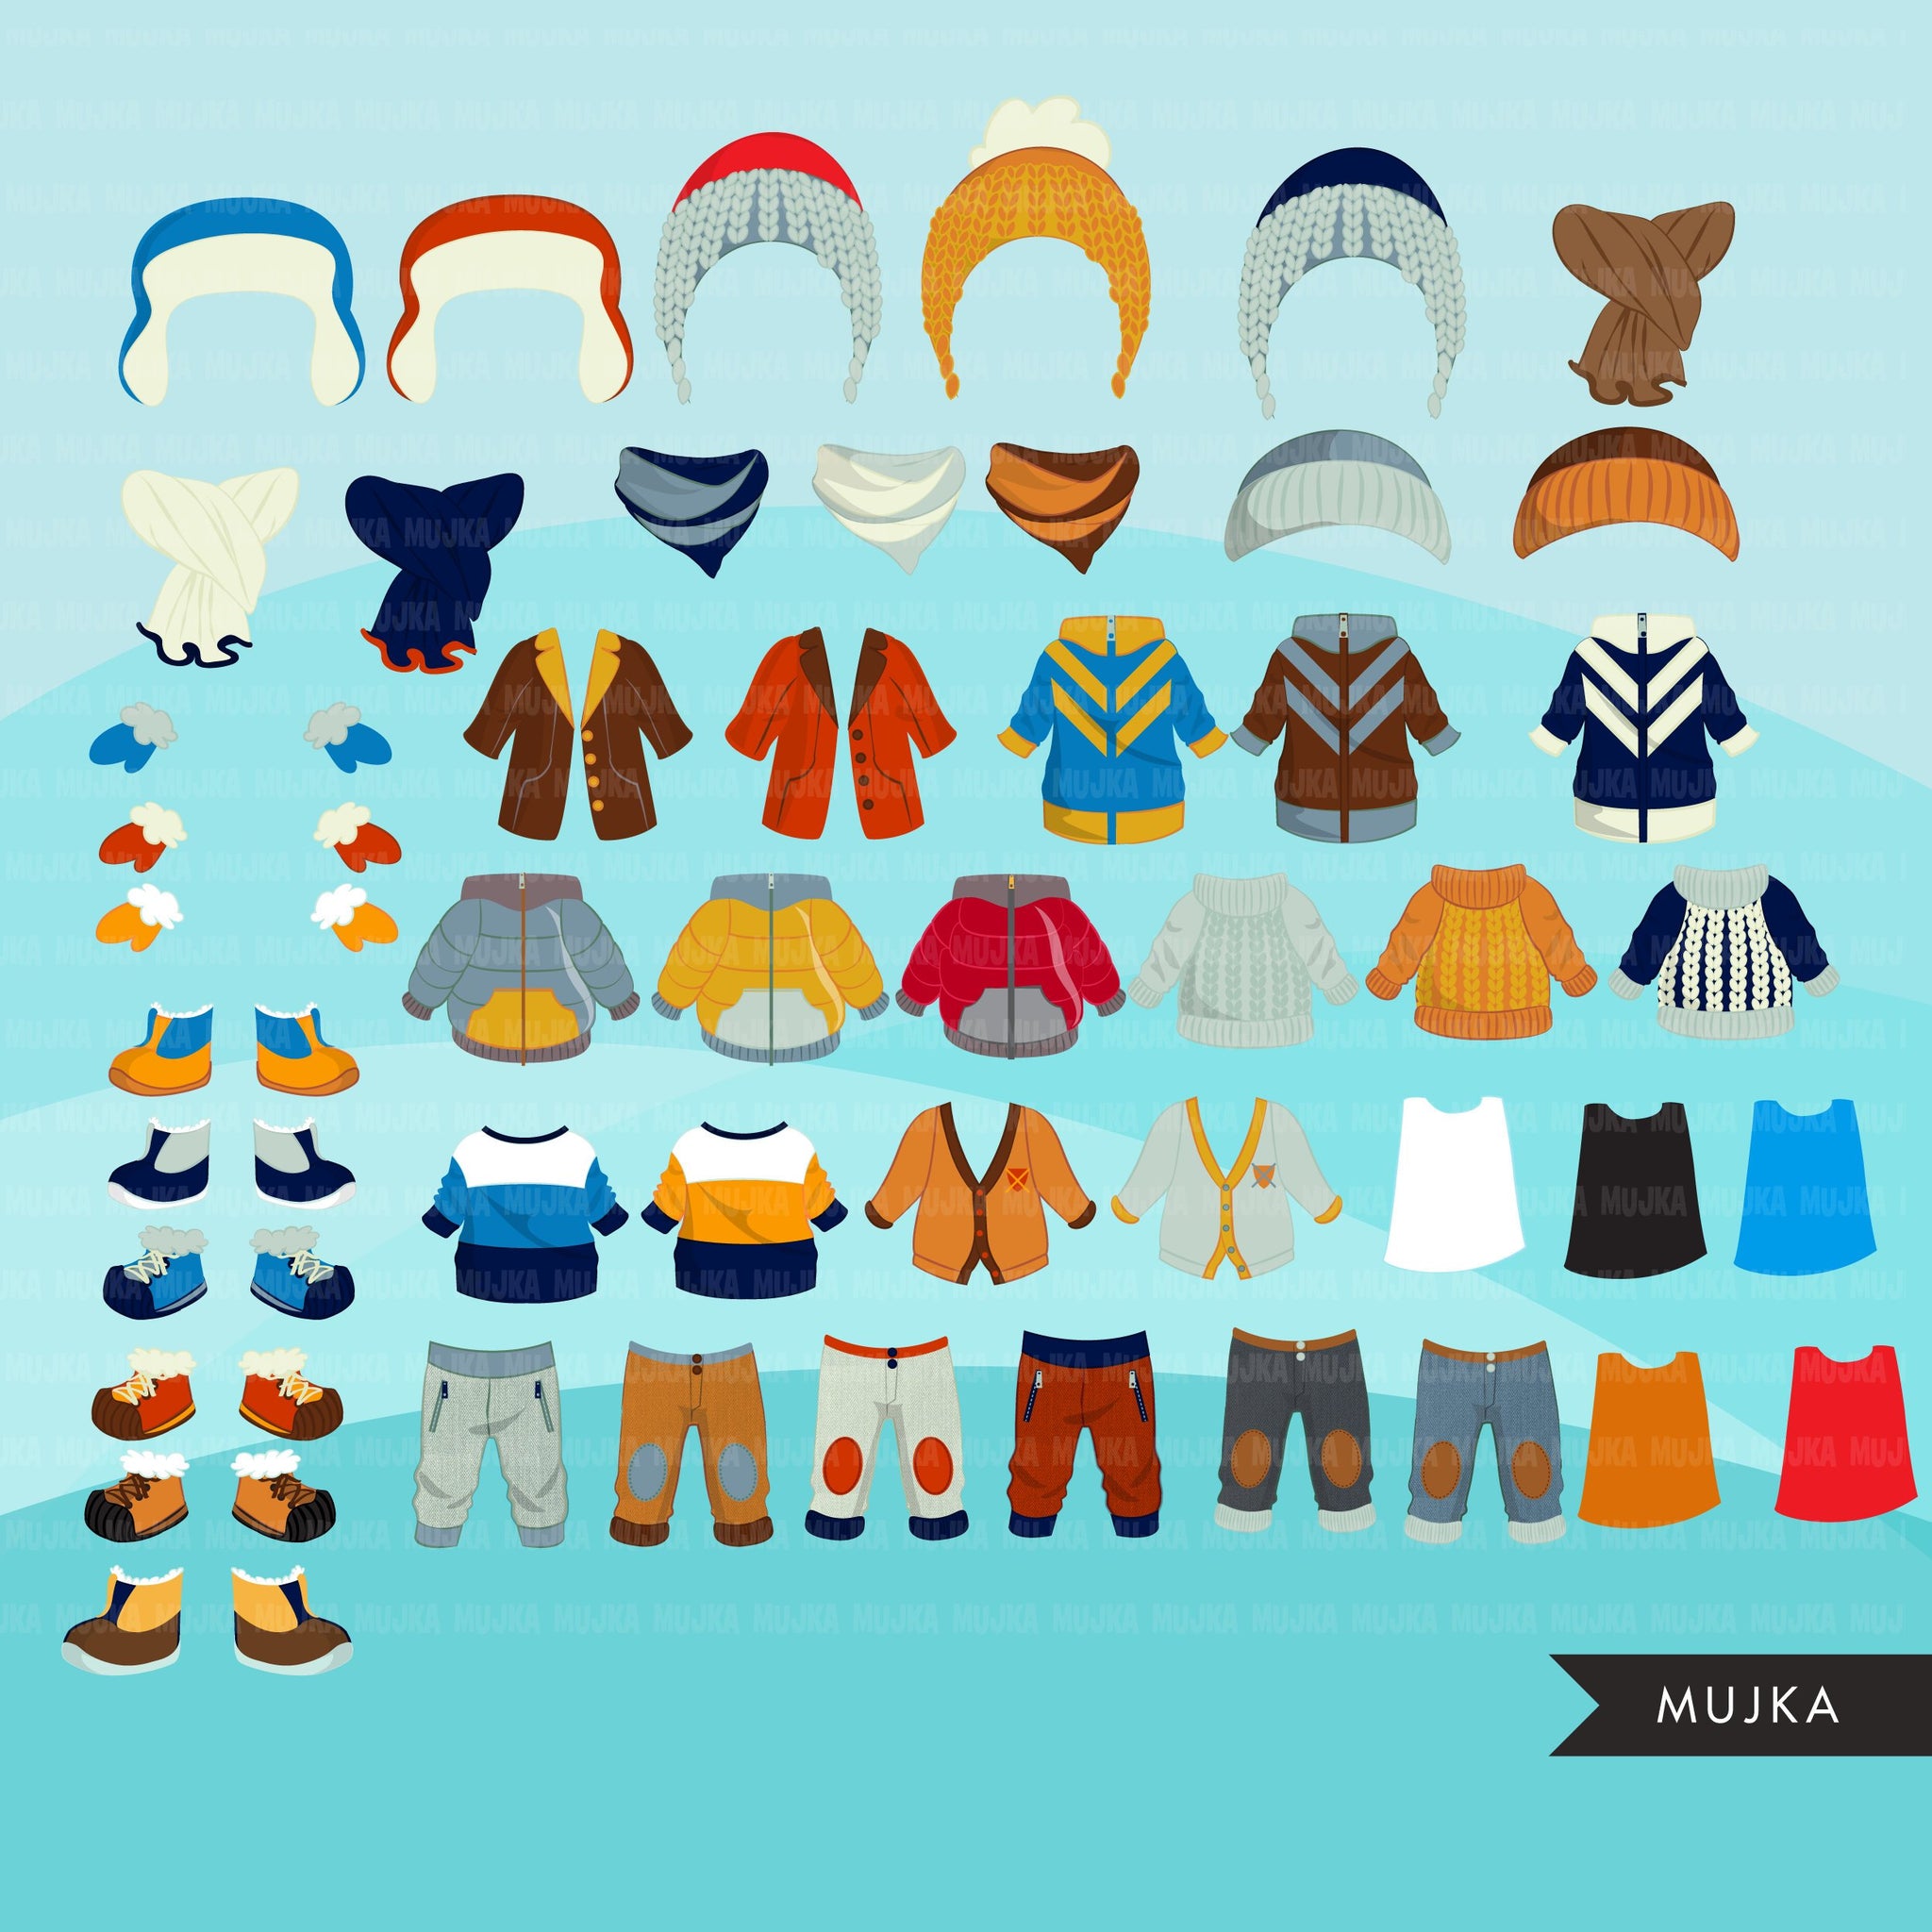 Paper doll clipart, Winter outfits, winter Dress up Party, boy fashion, black boy, png clip art, commercial use sublimation graphics